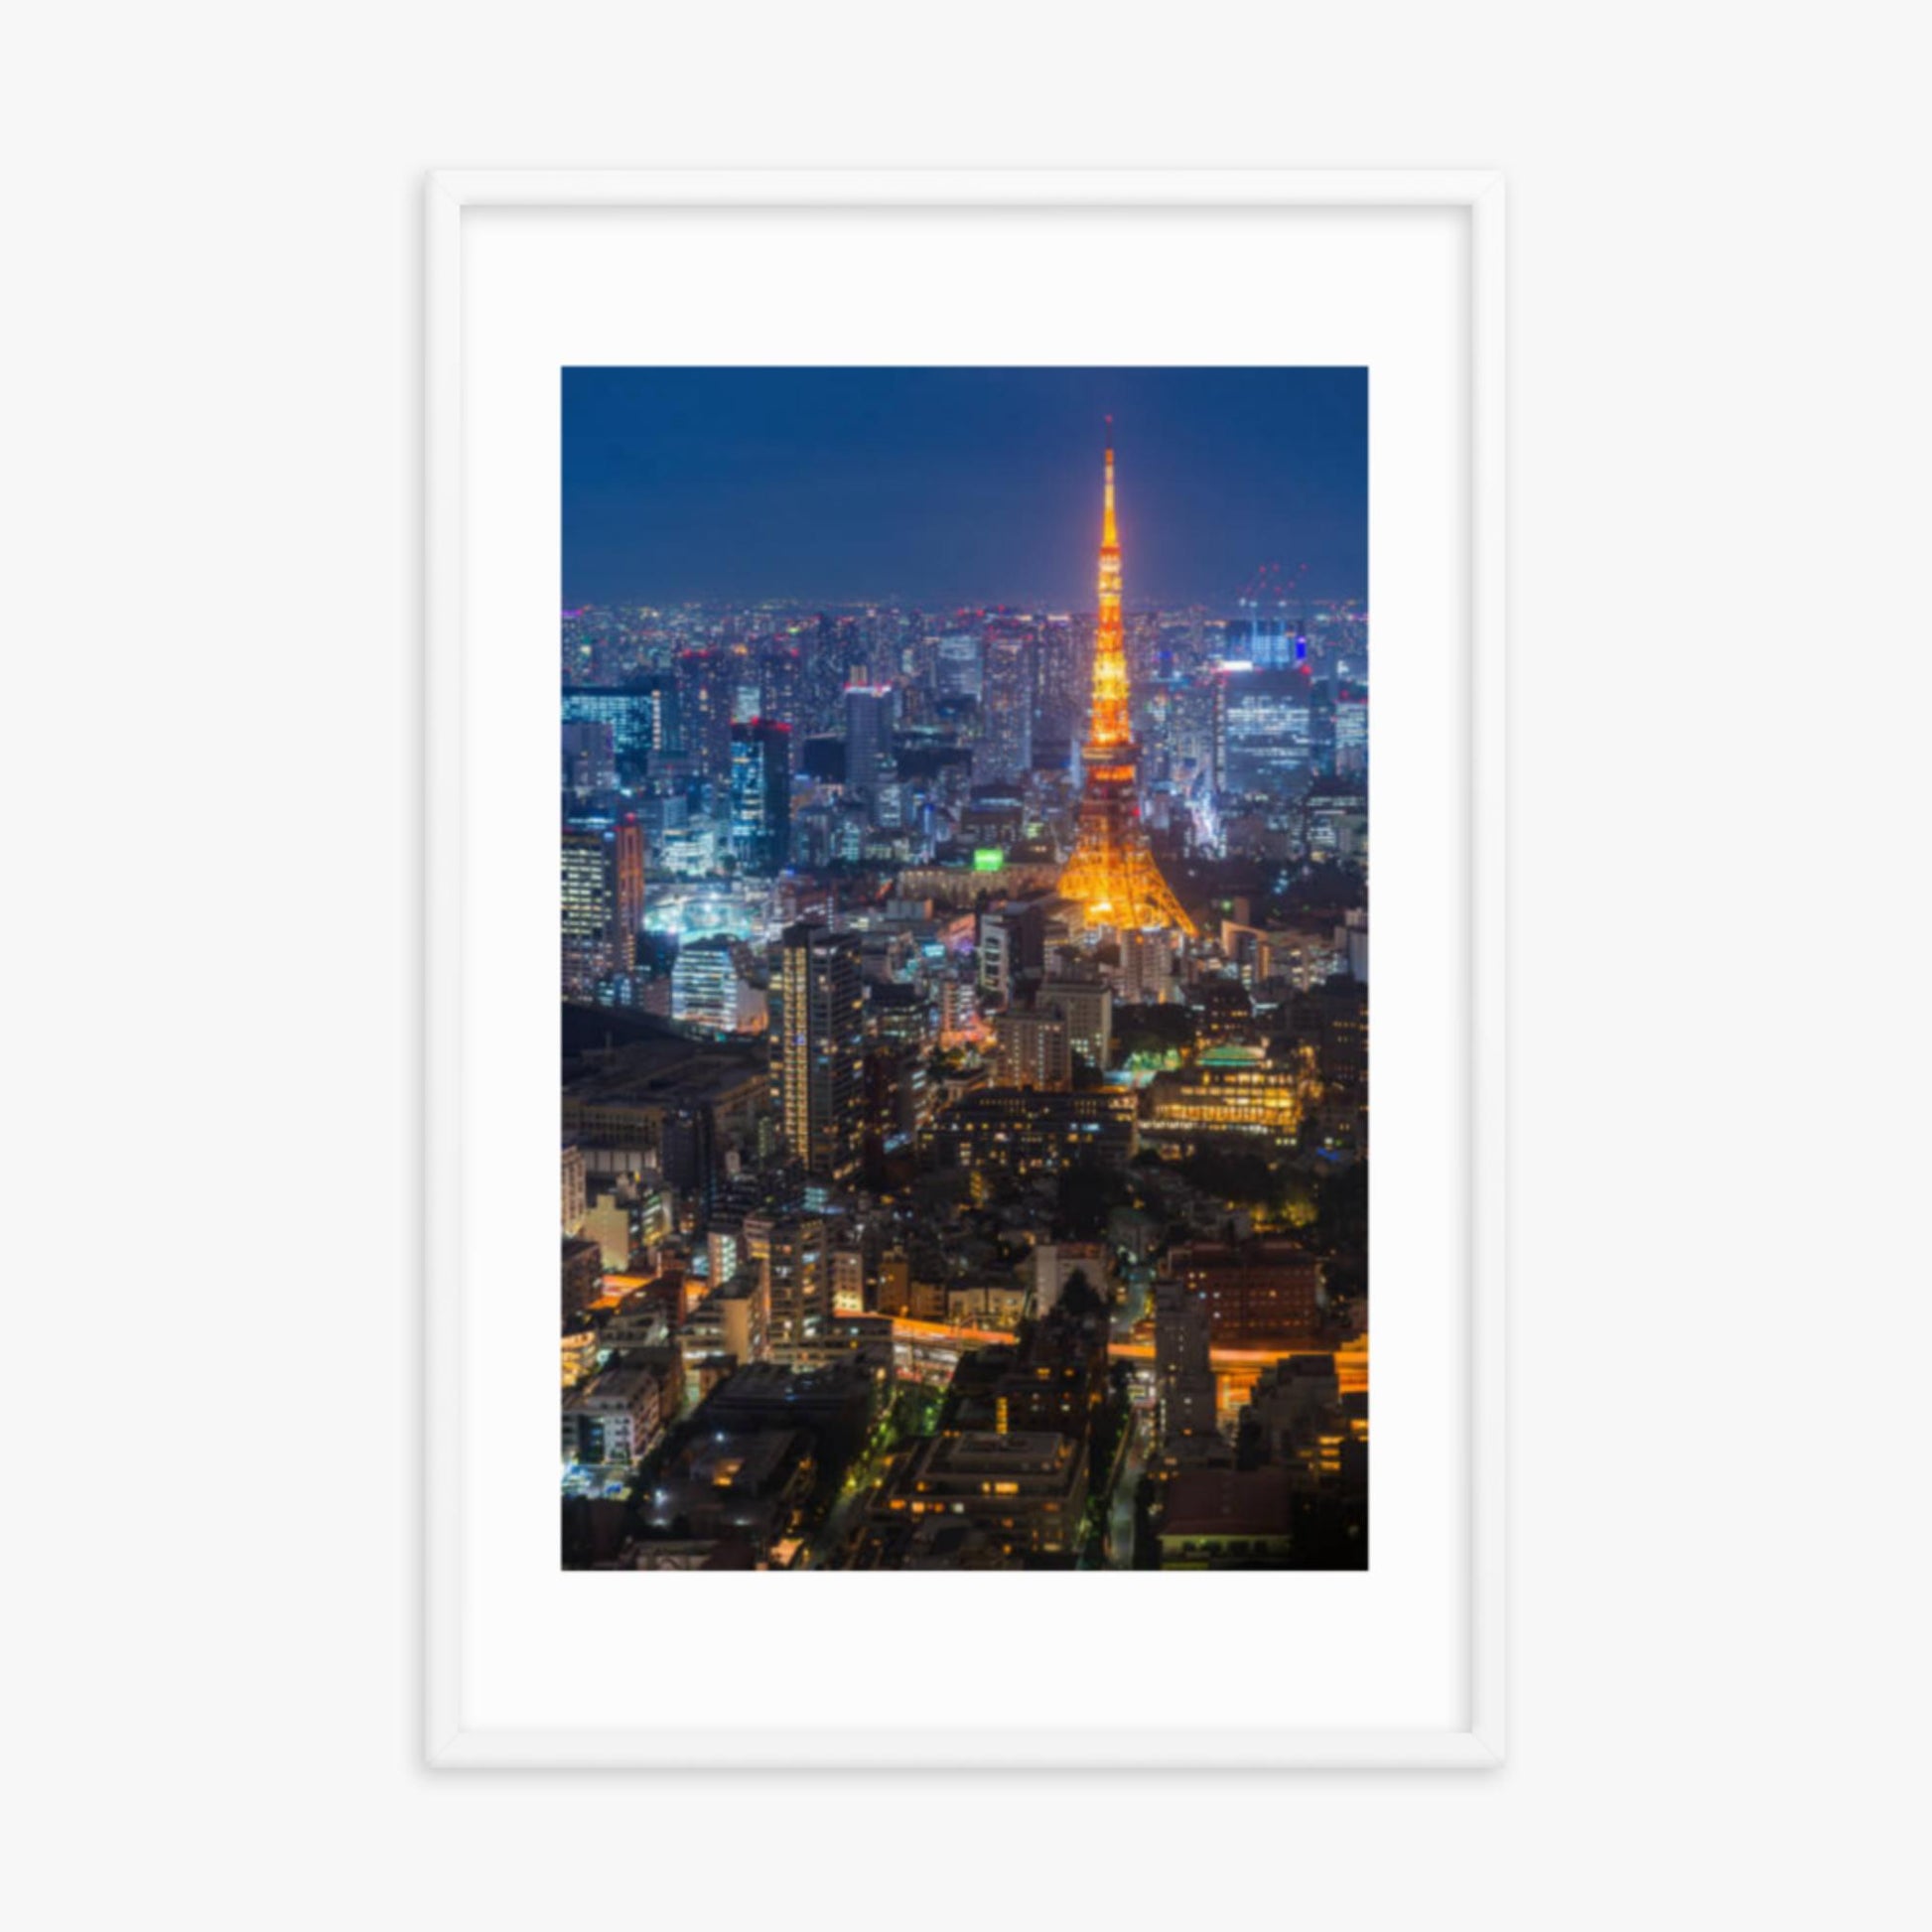 Tokyo Tower illuminated 24x36 in Poster With White Frame